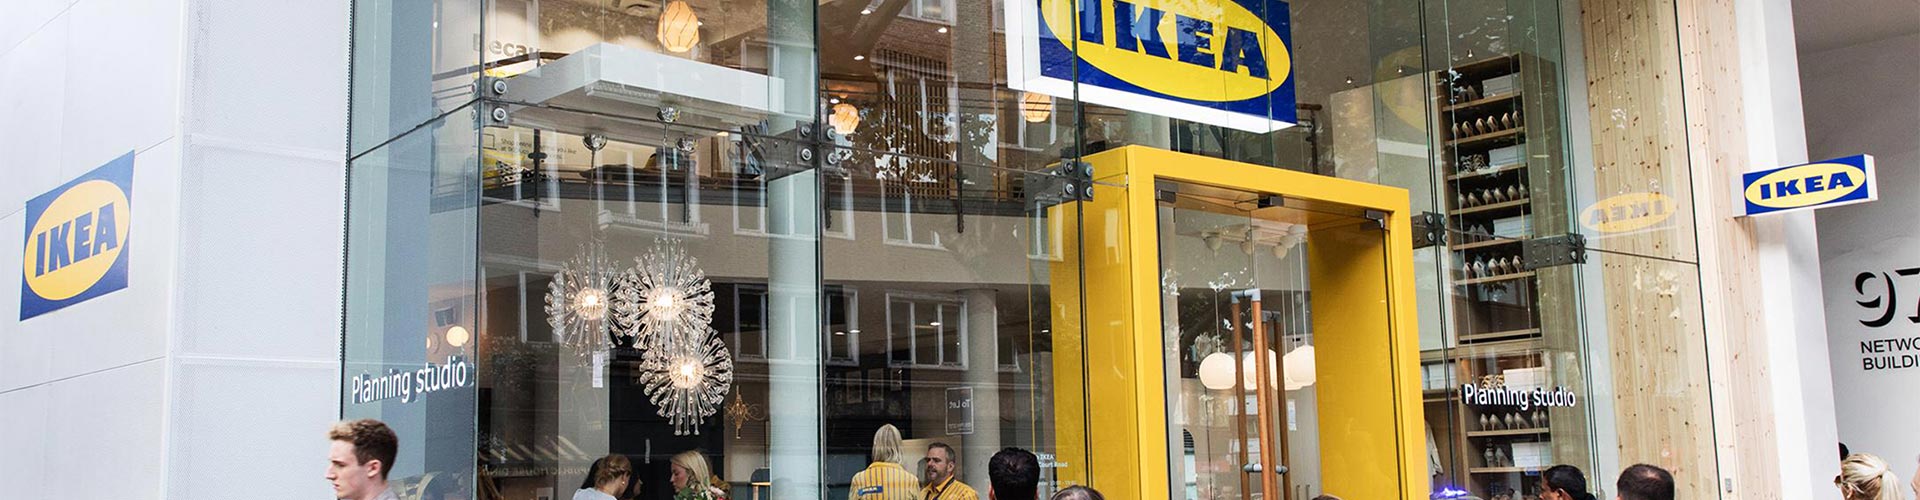 Blog banner featuring busy storefront entrance to an IKEA